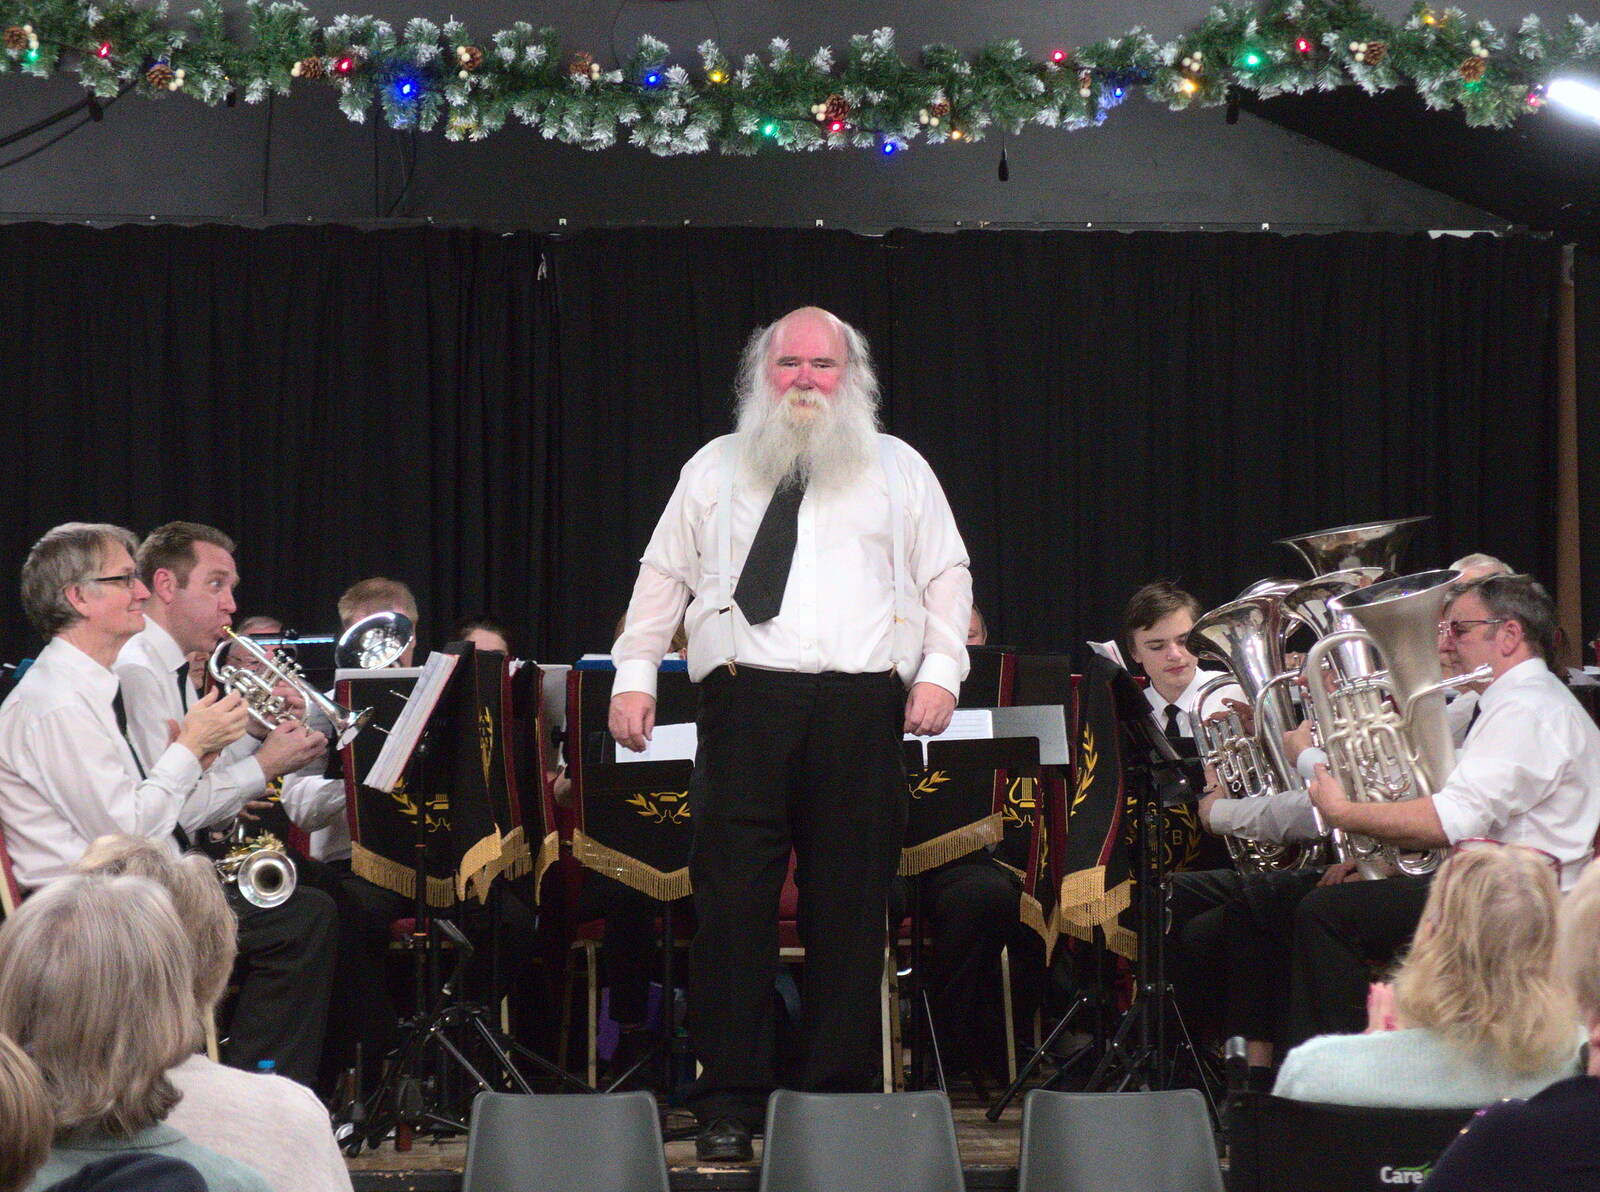 Adrian takes some applause from The Gislingham Silver Band Christmas Concert, Gislingham, Suffolk - 11th December 2018